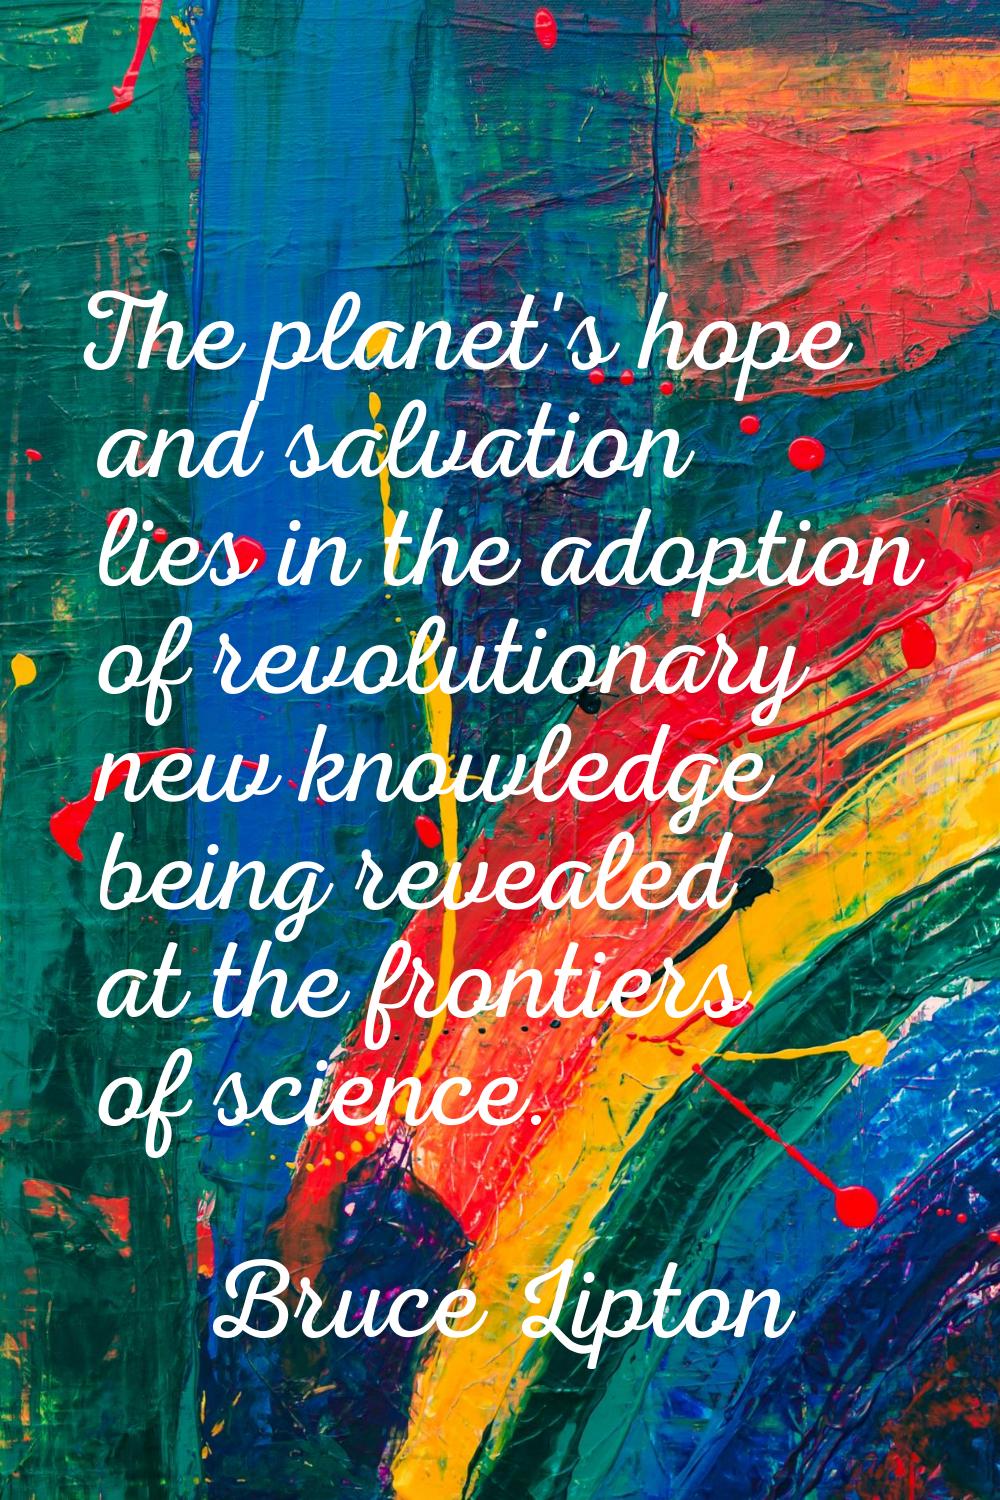 The planet's hope and salvation lies in the adoption of revolutionary new knowledge being revealed 